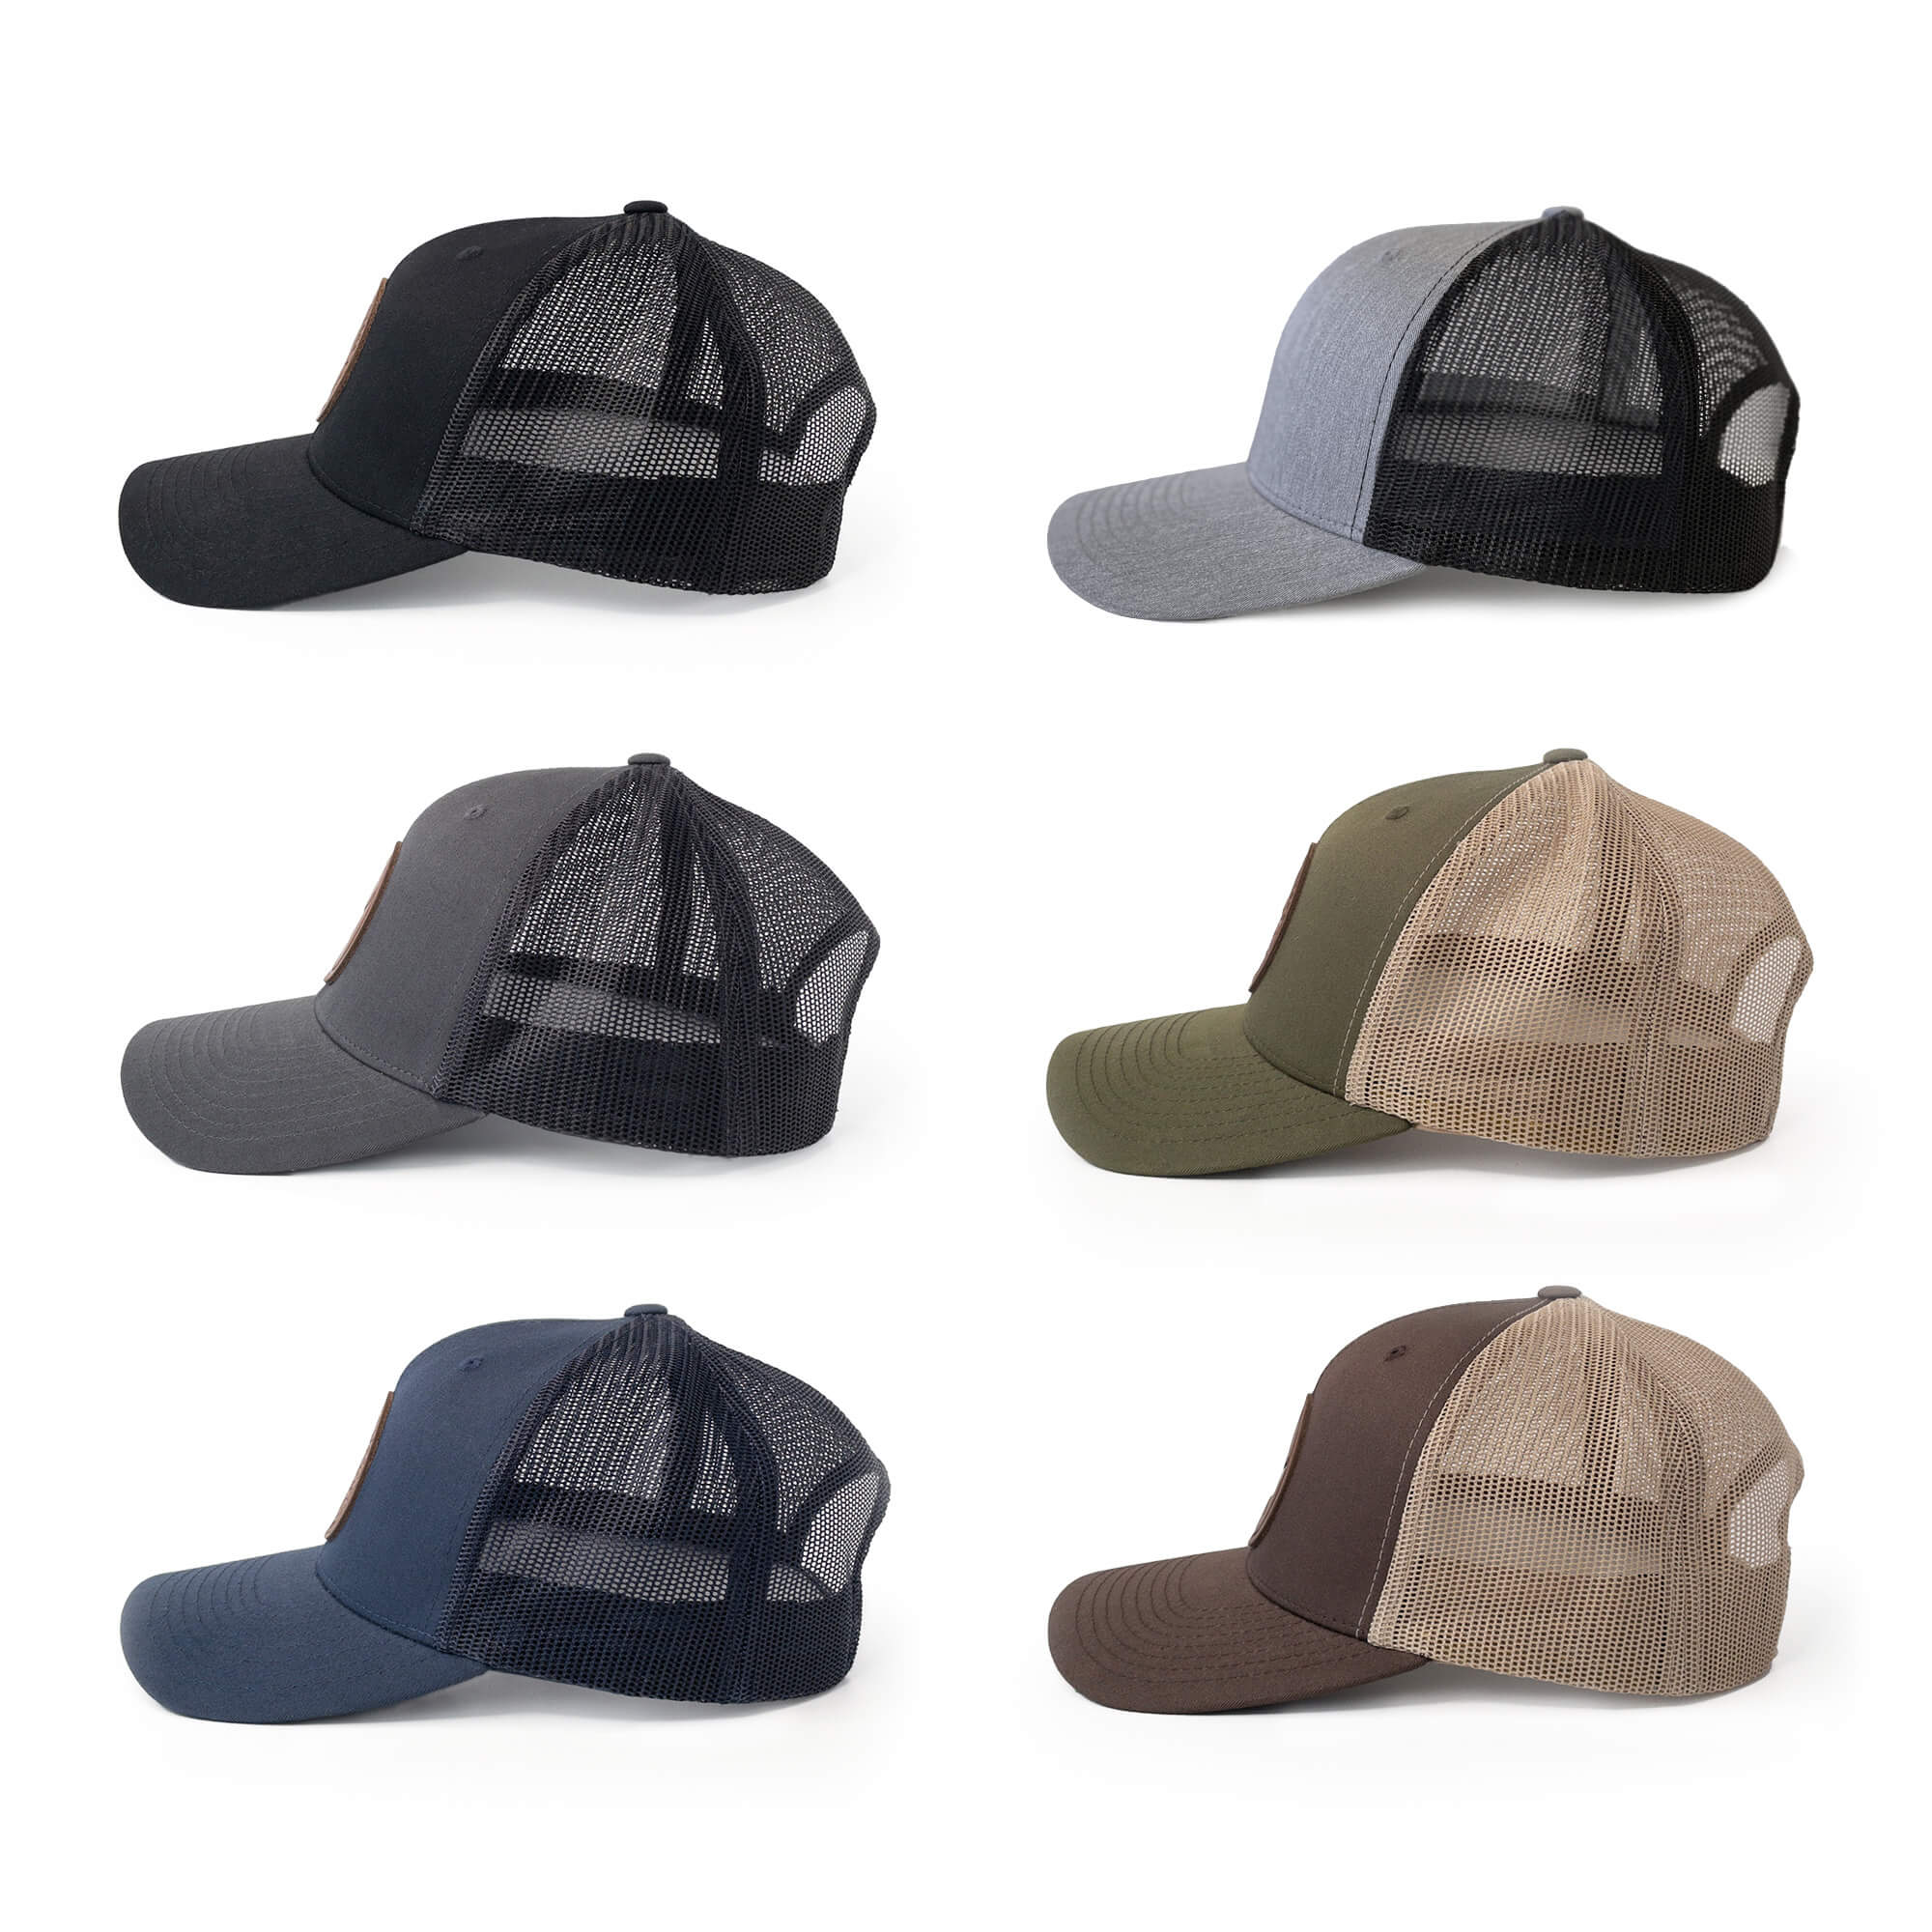 Leather patch trucker hats available in 6 colors | BLACK-004-001, CHARC-004-001, NAVY-004-001, HGREY-004-001, MOSS-004-001, BROWN-004-001